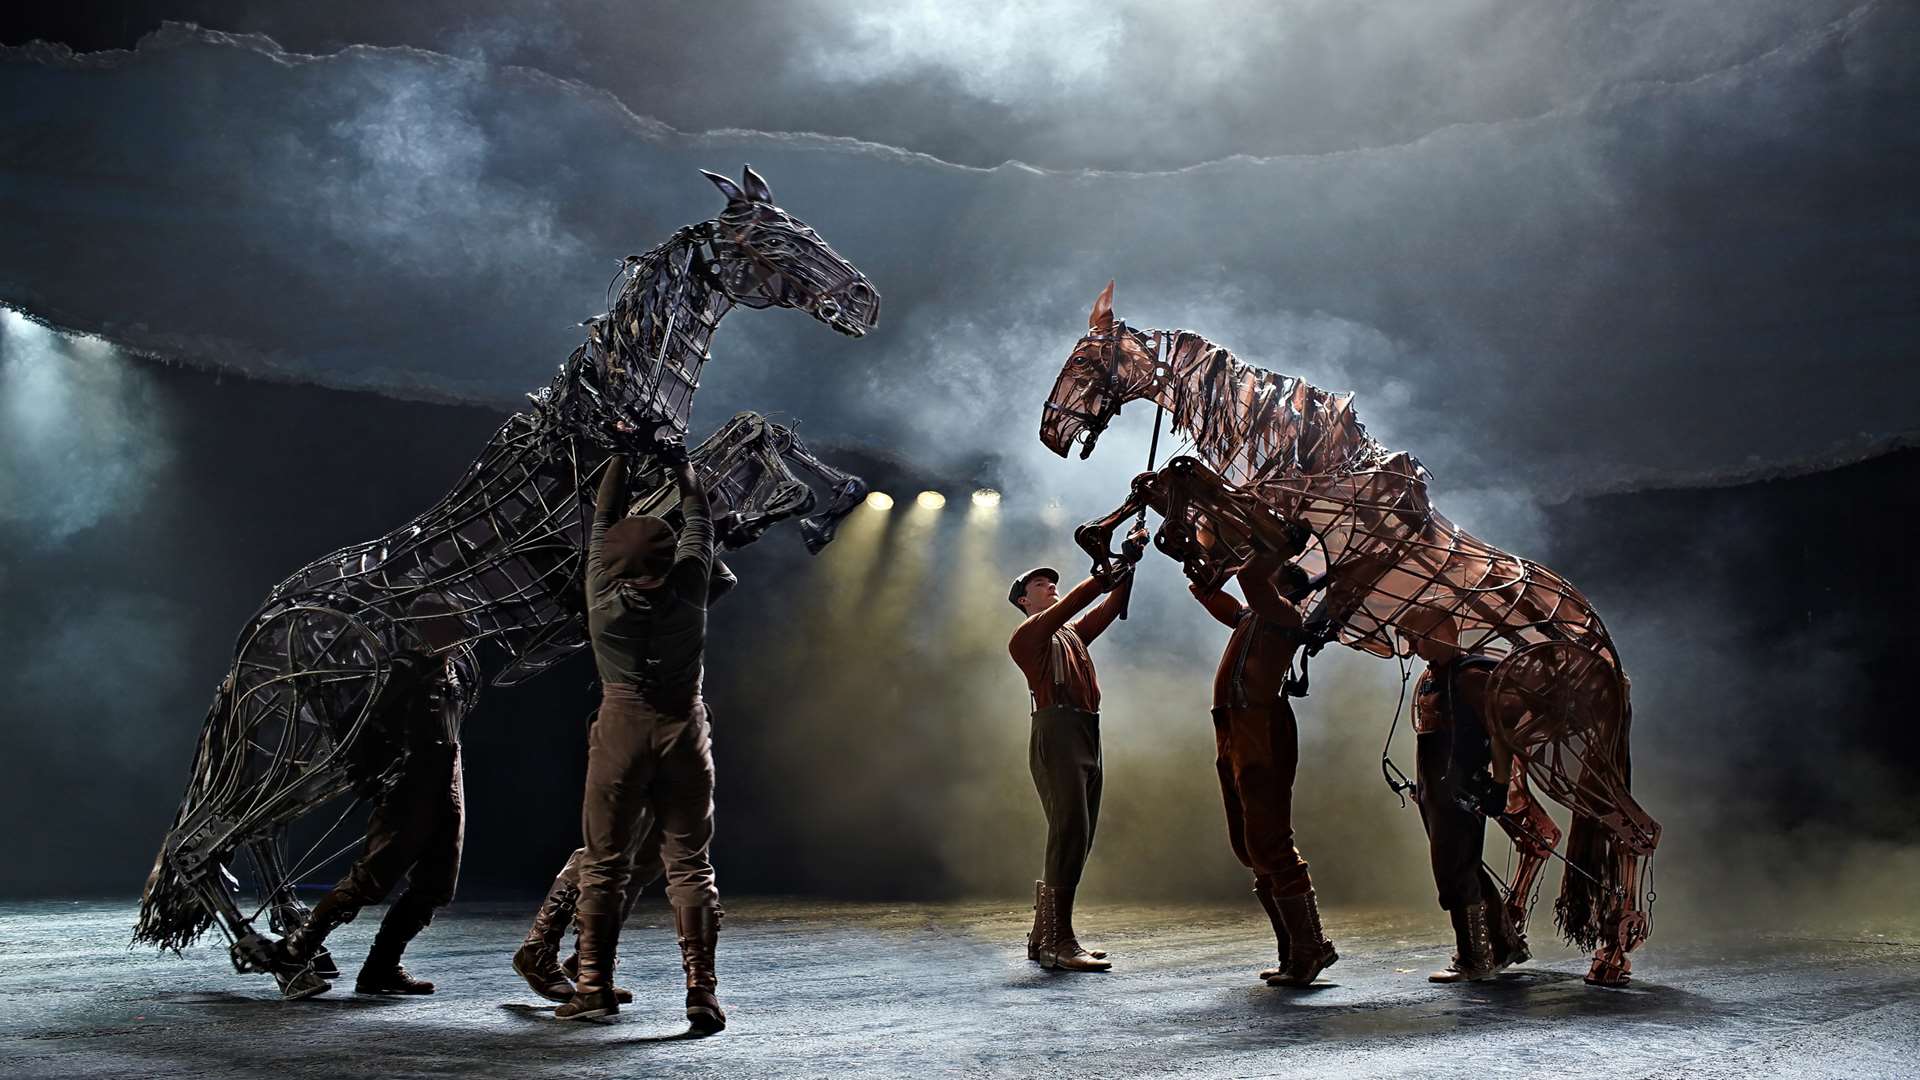 The National Theatre's War Horse is at the Marlowe for its 10th anniversary